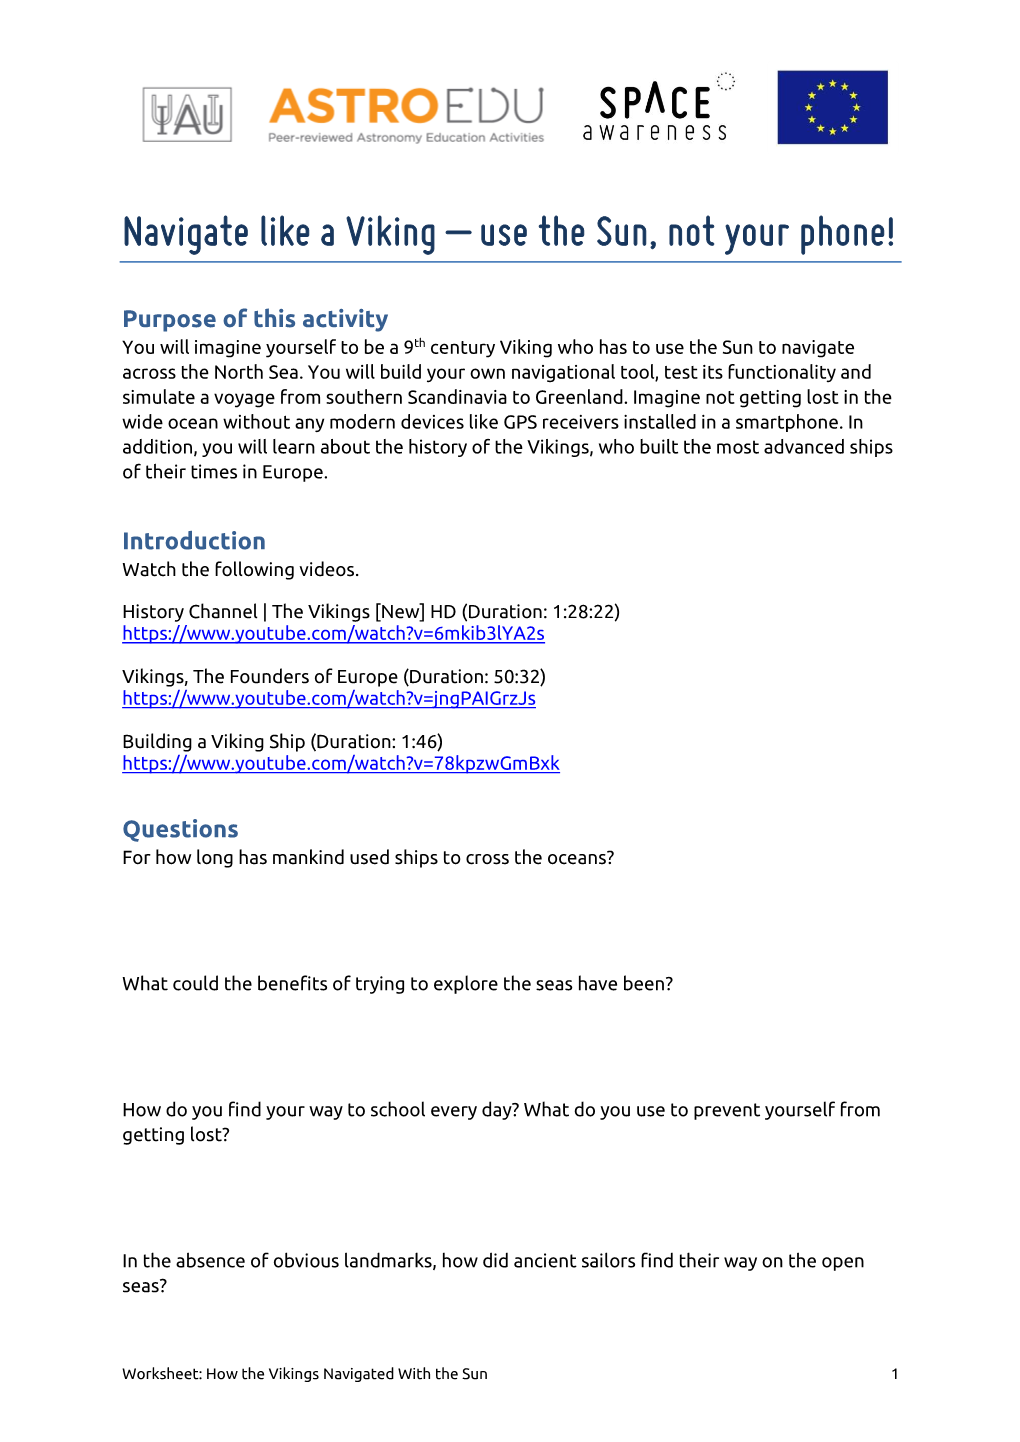 Worksheet: How the Vikings Navigated with the Sun 1